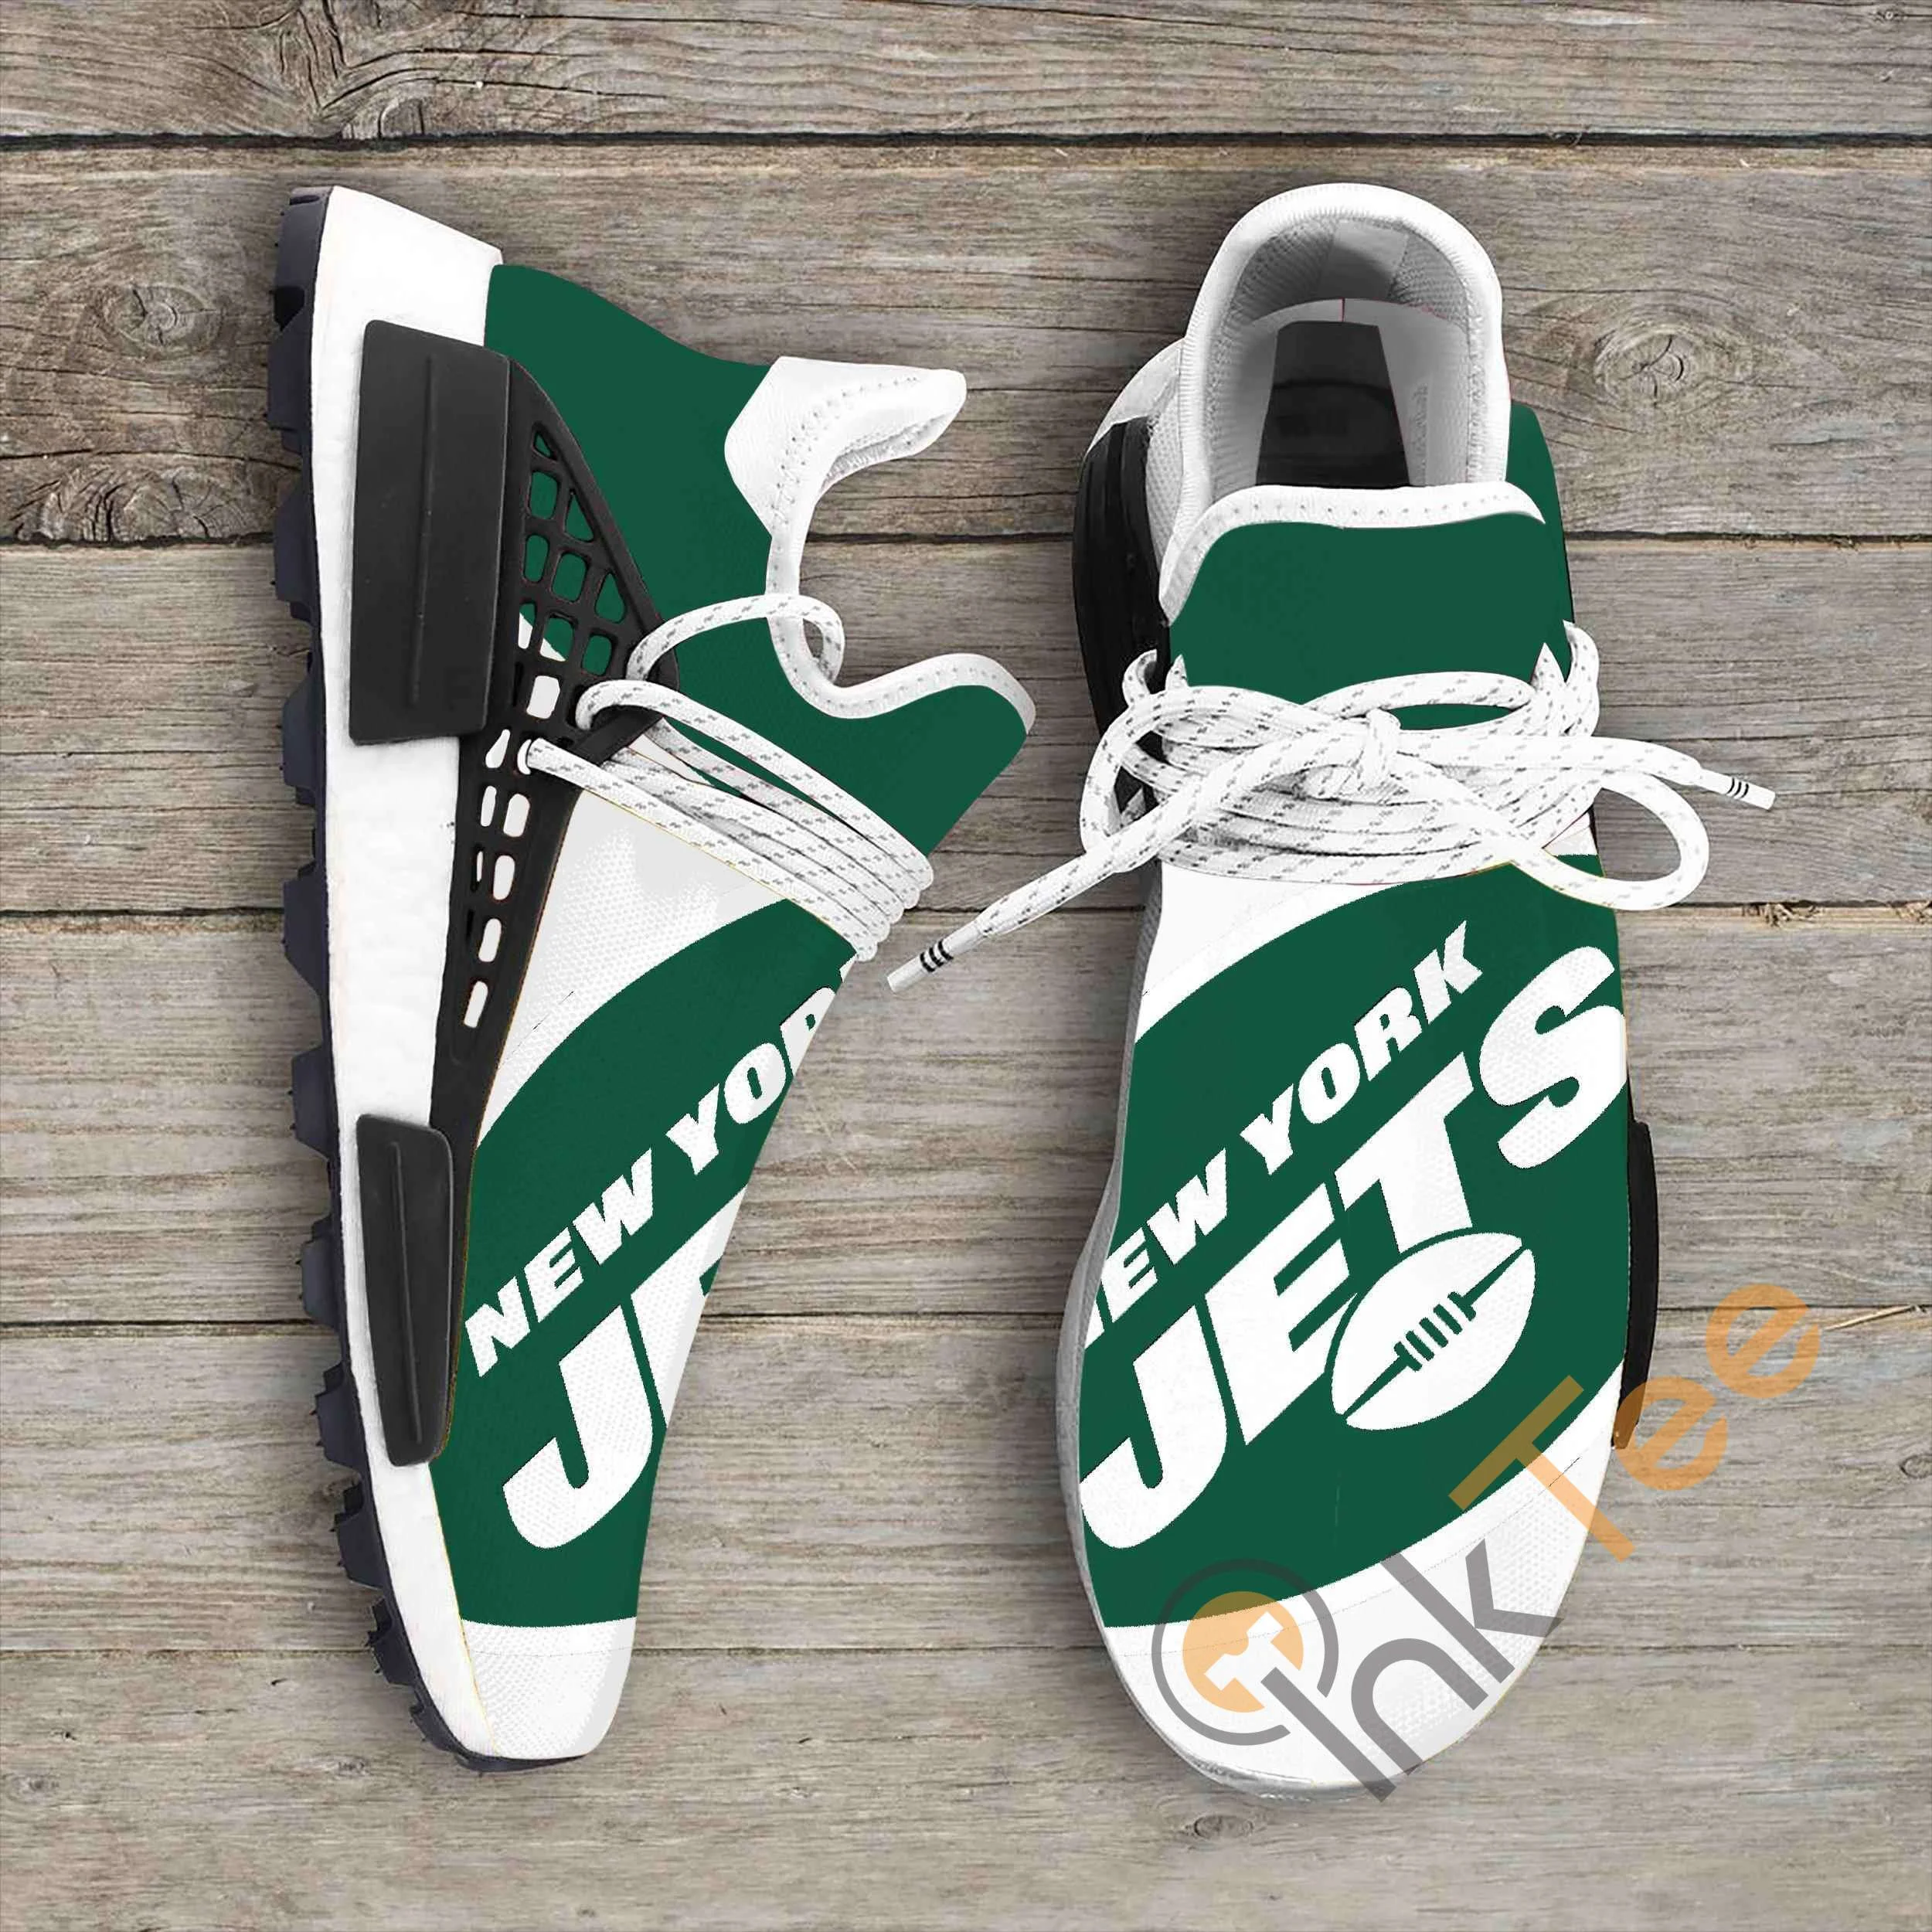 New York Jets Nfl NMD Human Shoes